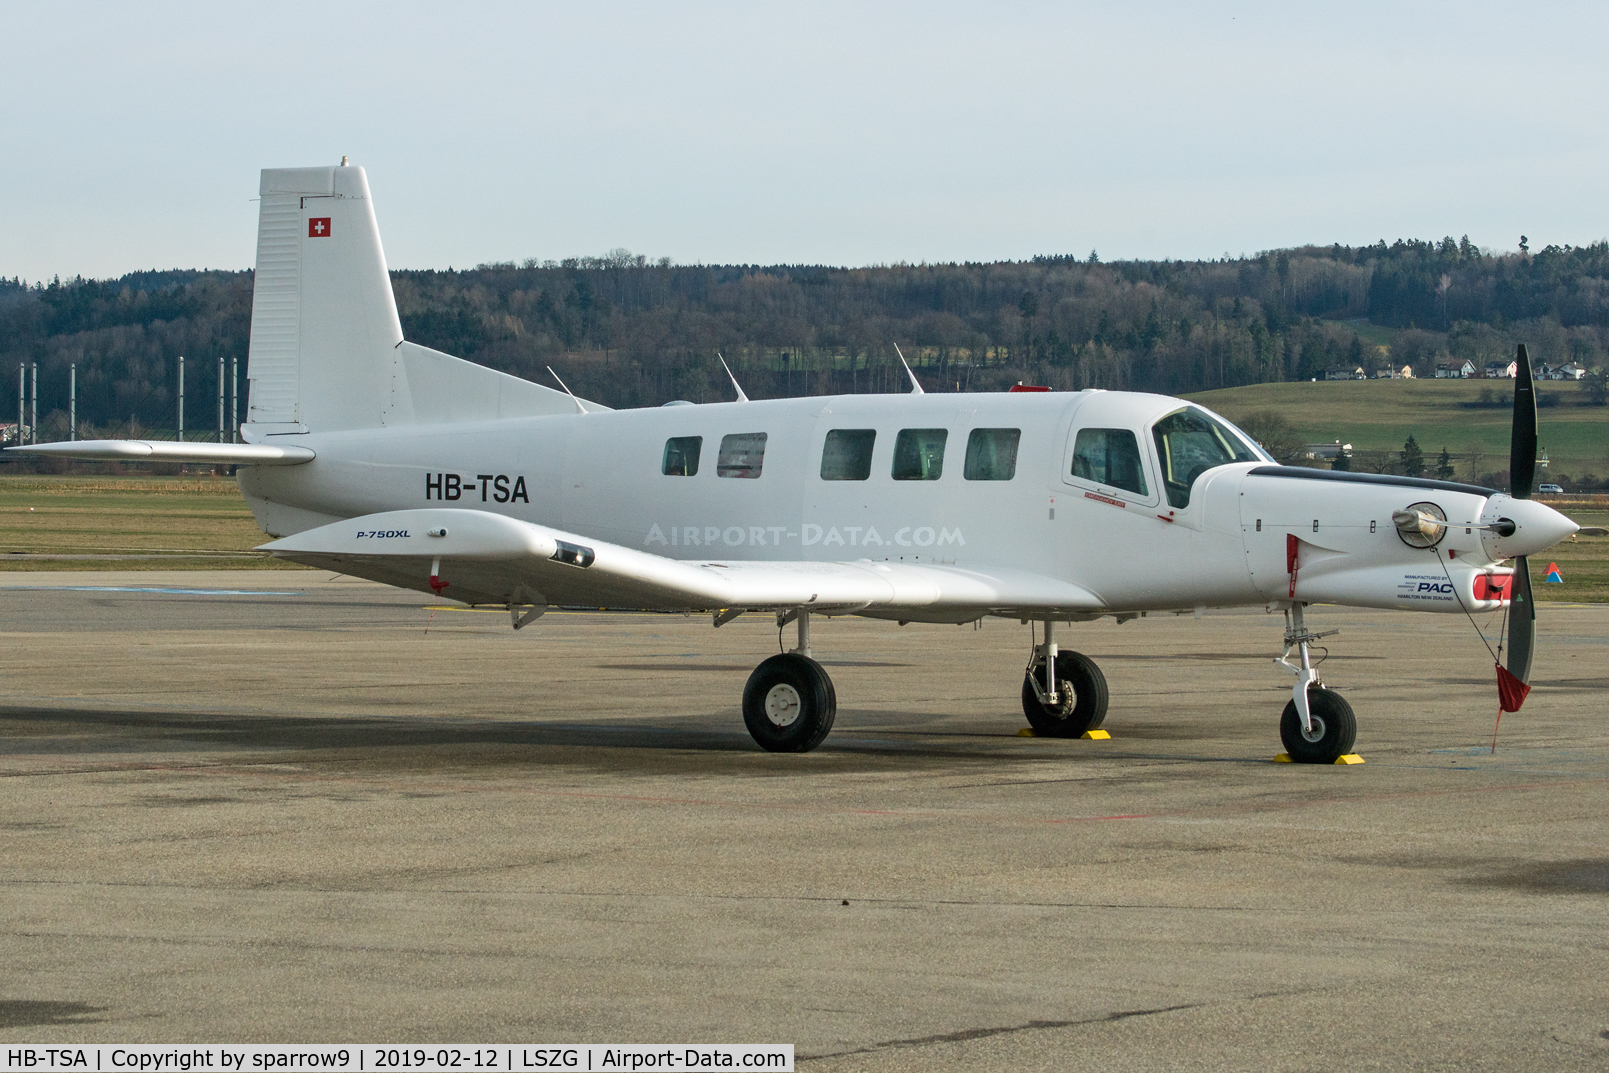 HB-TSA, 2009 Pacific Aerospace 750XL C/N 152, At Grenchen. Used for para-dropping at Beromuenster.